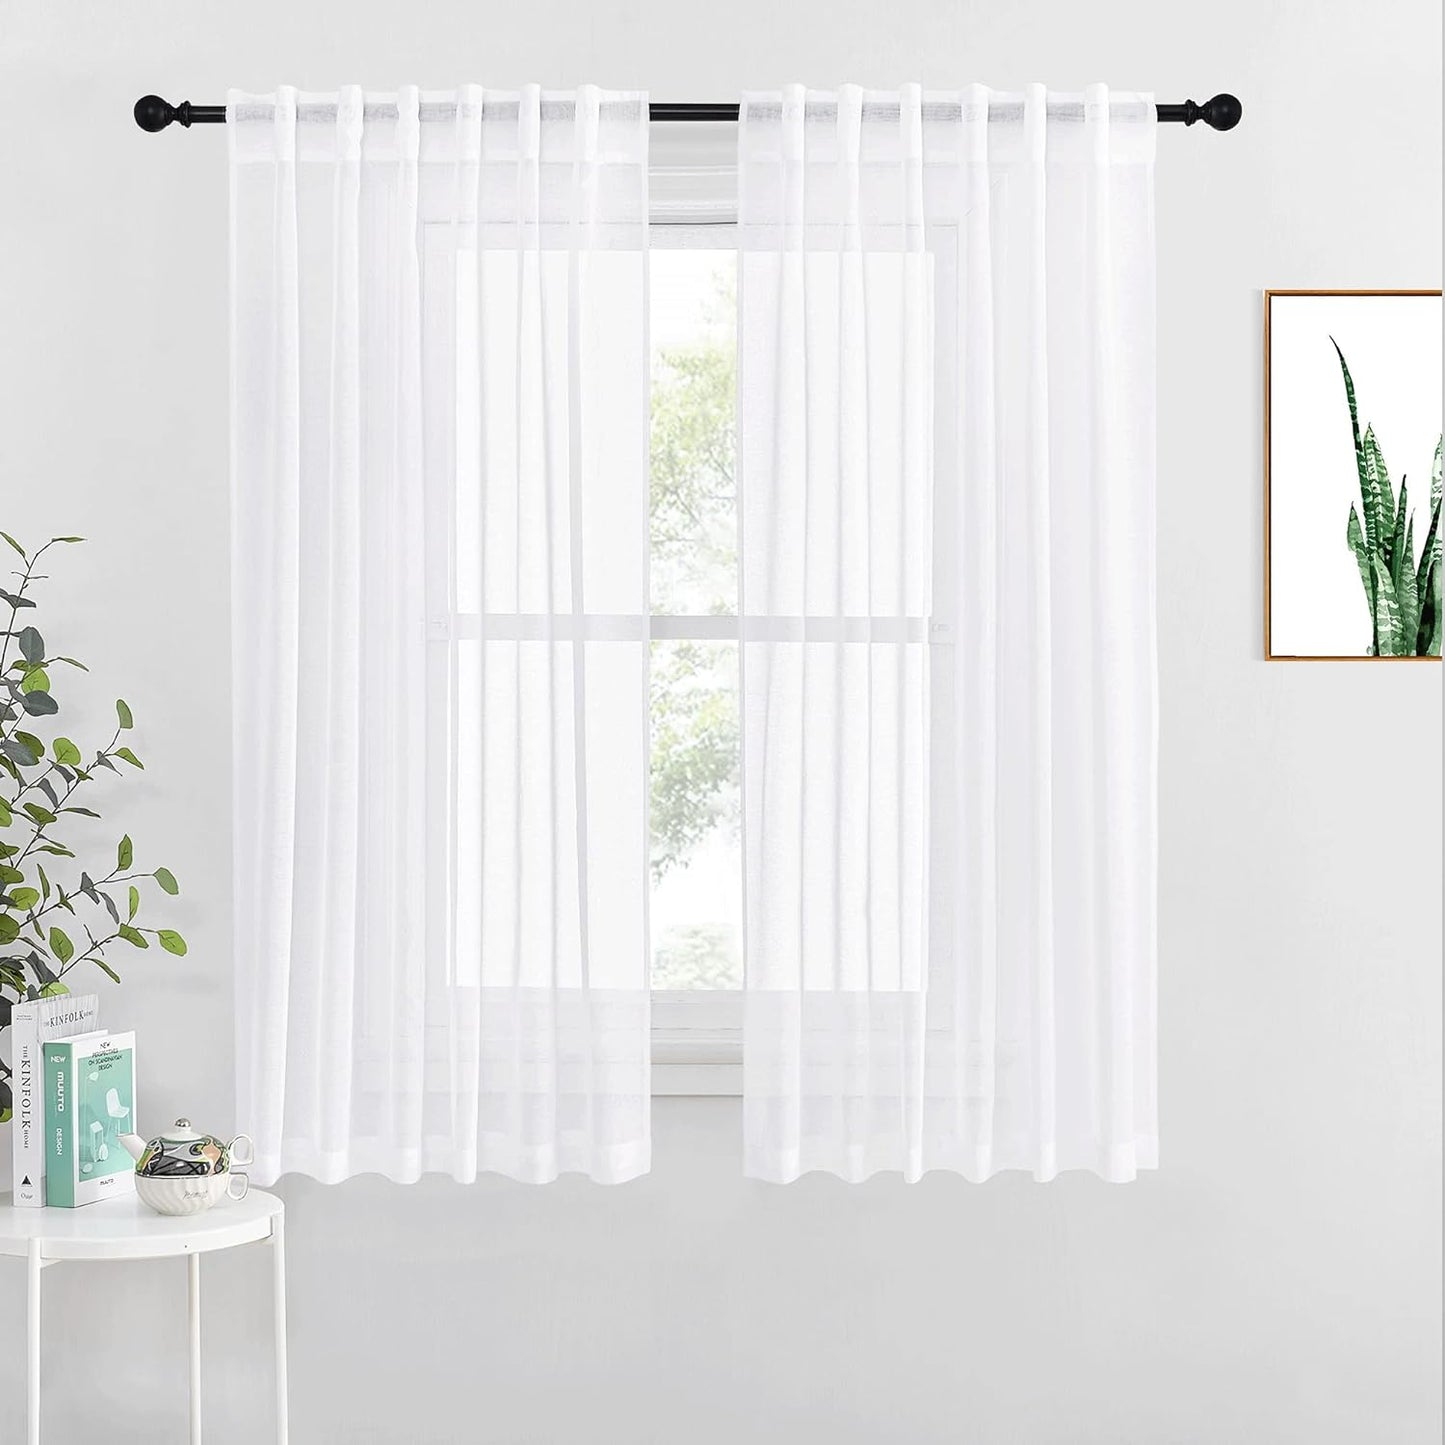 NICETOWN White Semi Sheer Curtains for Living Room- Linen Texture Light Airy Drapes, Rod Pocket & Back Tab Design Voile Panels for Large Window, Set of 2, 55 X 108 Inch  NICETOWN White W55 X L63 